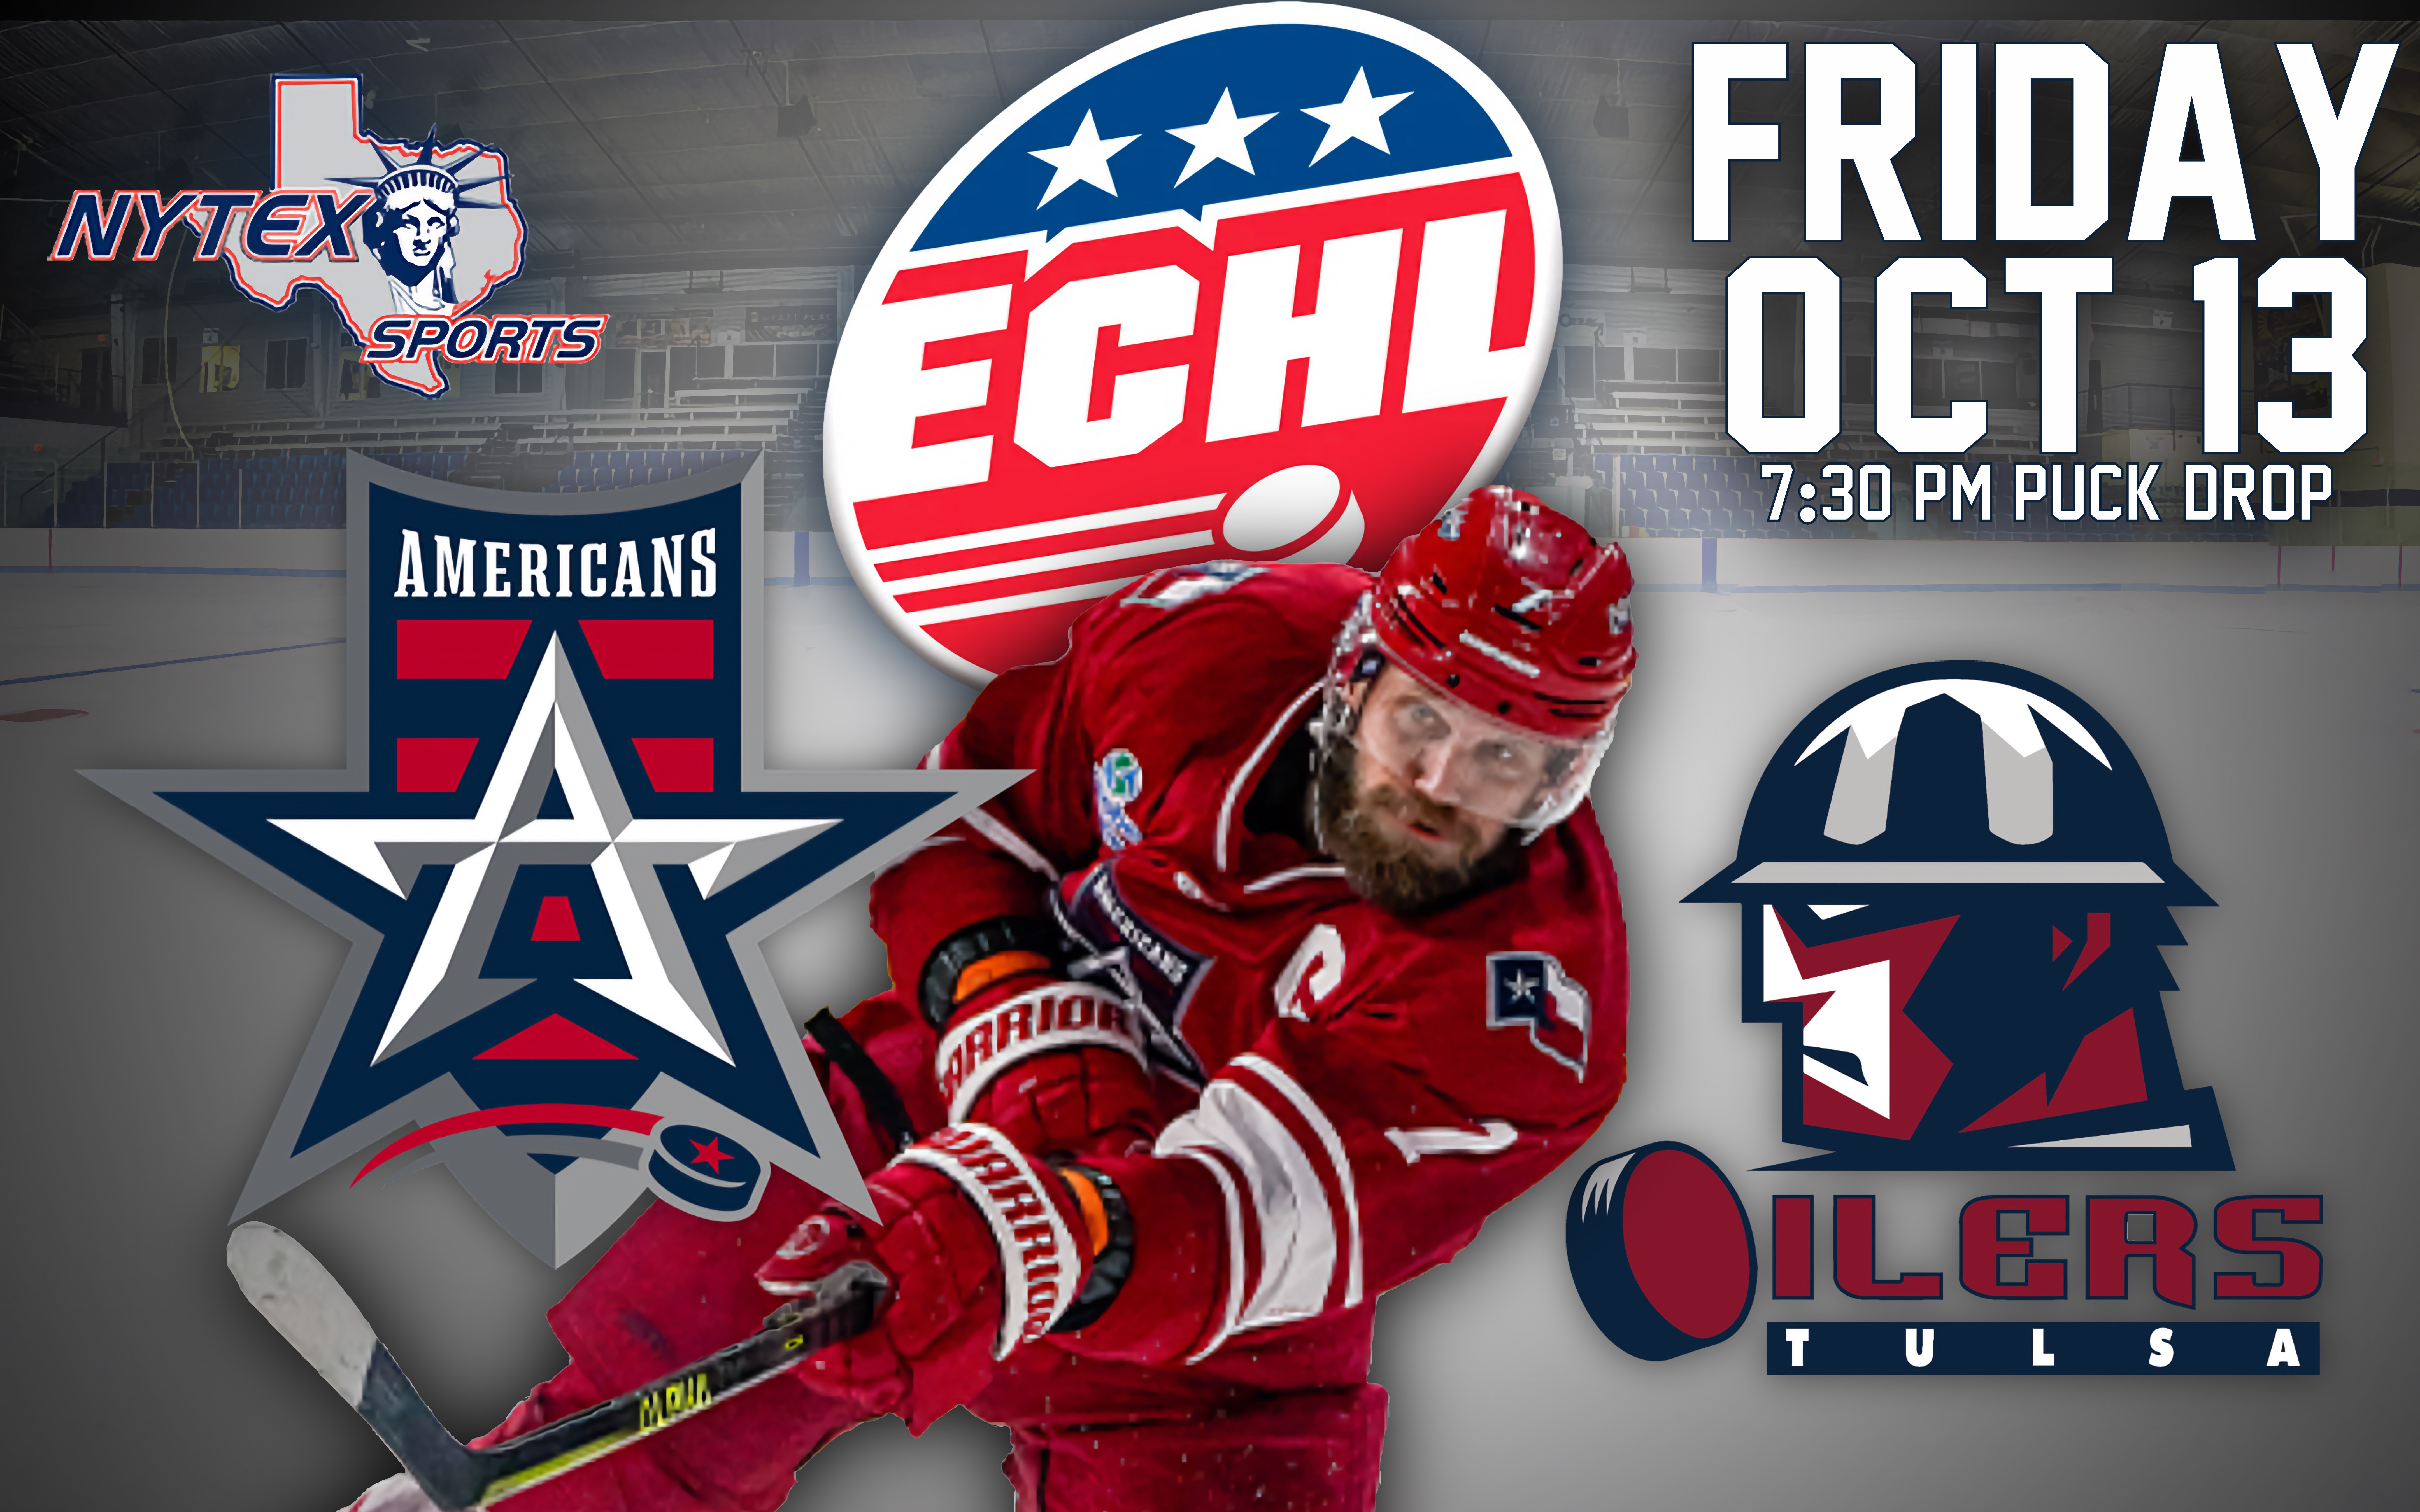 Allen Americans to Face Tulsa Oilers in ECHL Rivalry on Oct 13th at NYTEX!